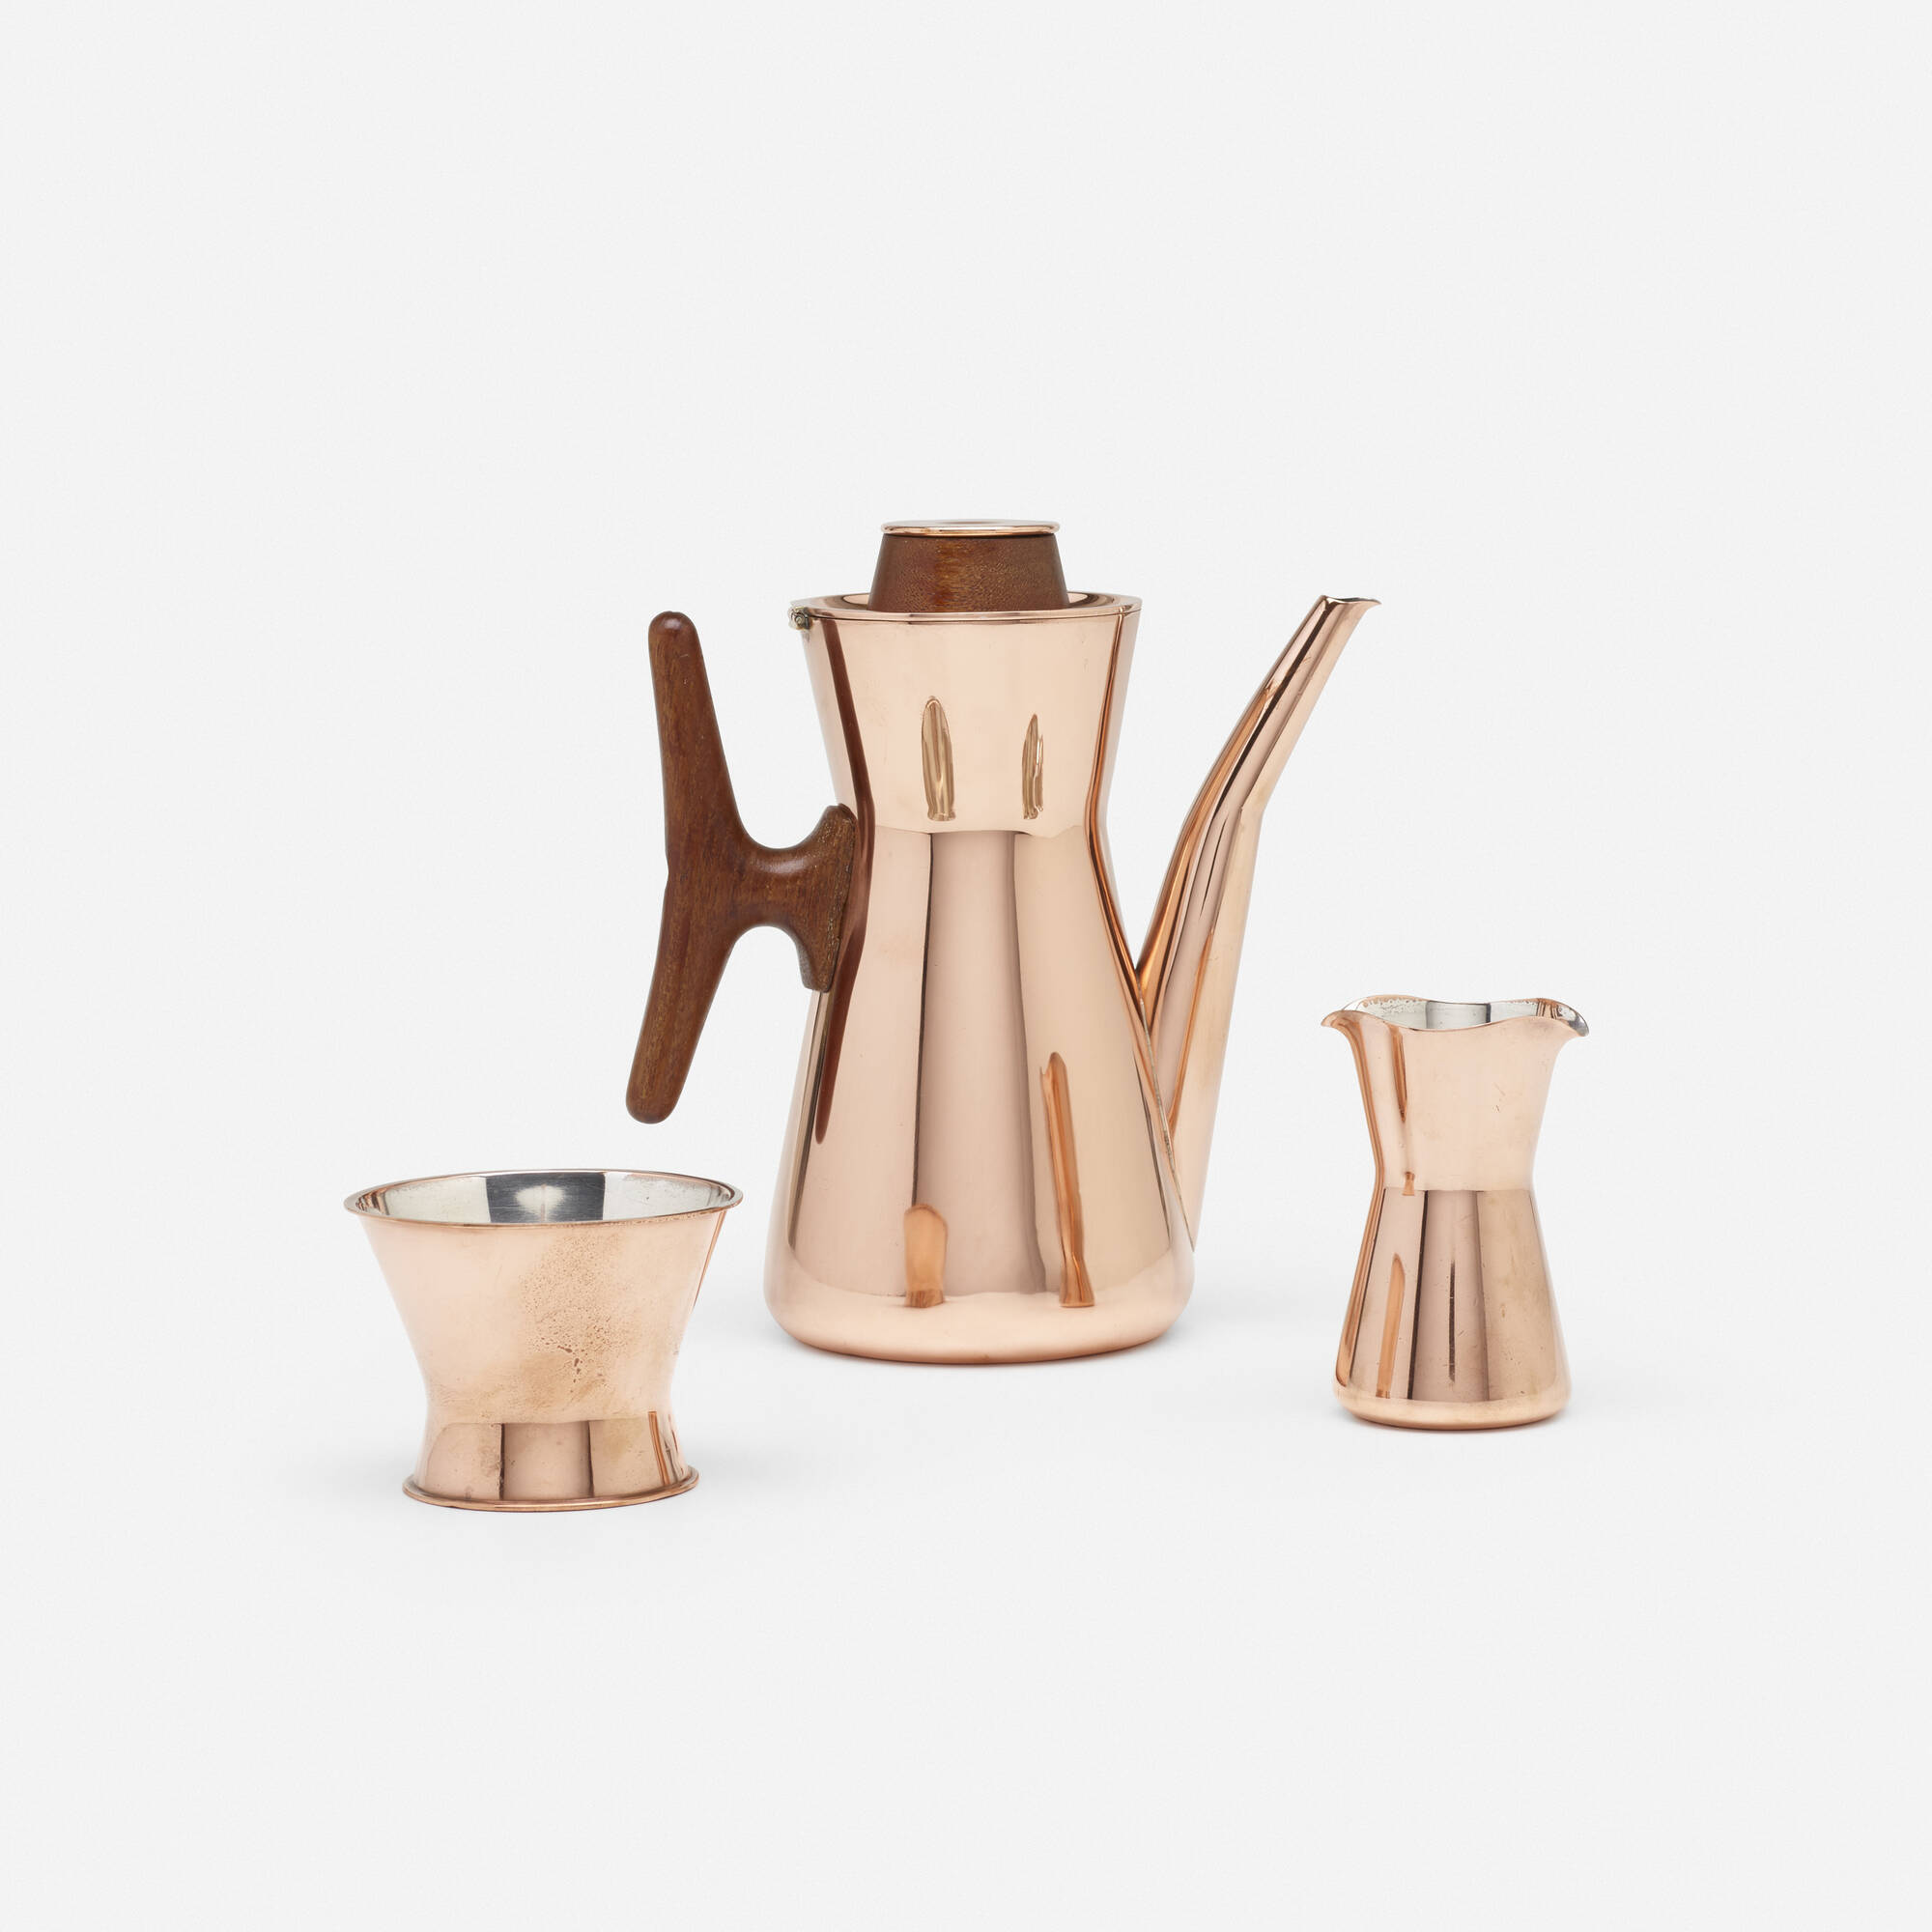 224: TAPIO WIRKKALA, coffee service < Art + Design, 19 July 2018 < Auctions  | Wright: Auctions of Art and Design